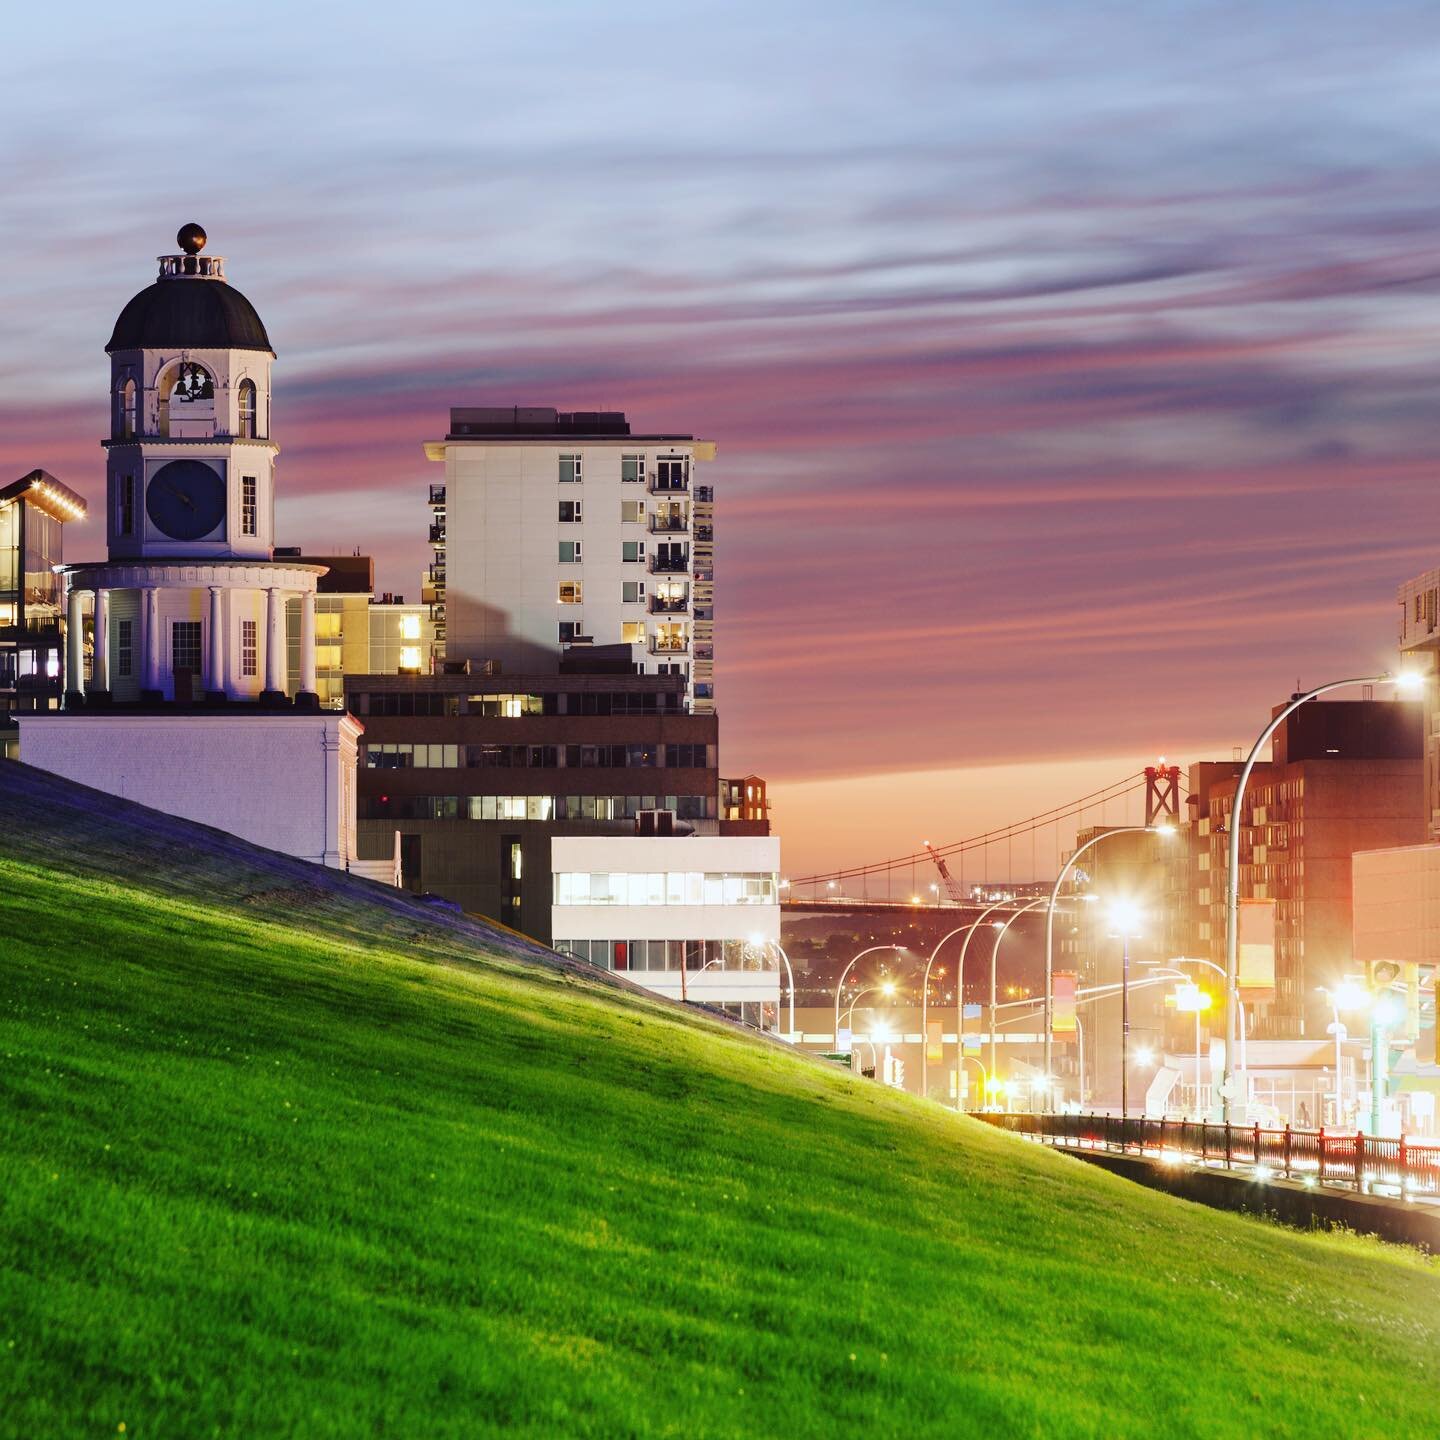 HALIFAX&rsquo;S CITADEL HILL, WITH A VIEW TOWARD THE WATERFRONT PAST THE FAMOUS CLOCK TOWER.

Think about it: 

In downtown Halifax, you can live near the water and still be in the centre of a bustling (well, semi-bustling, comparatively) urban centr